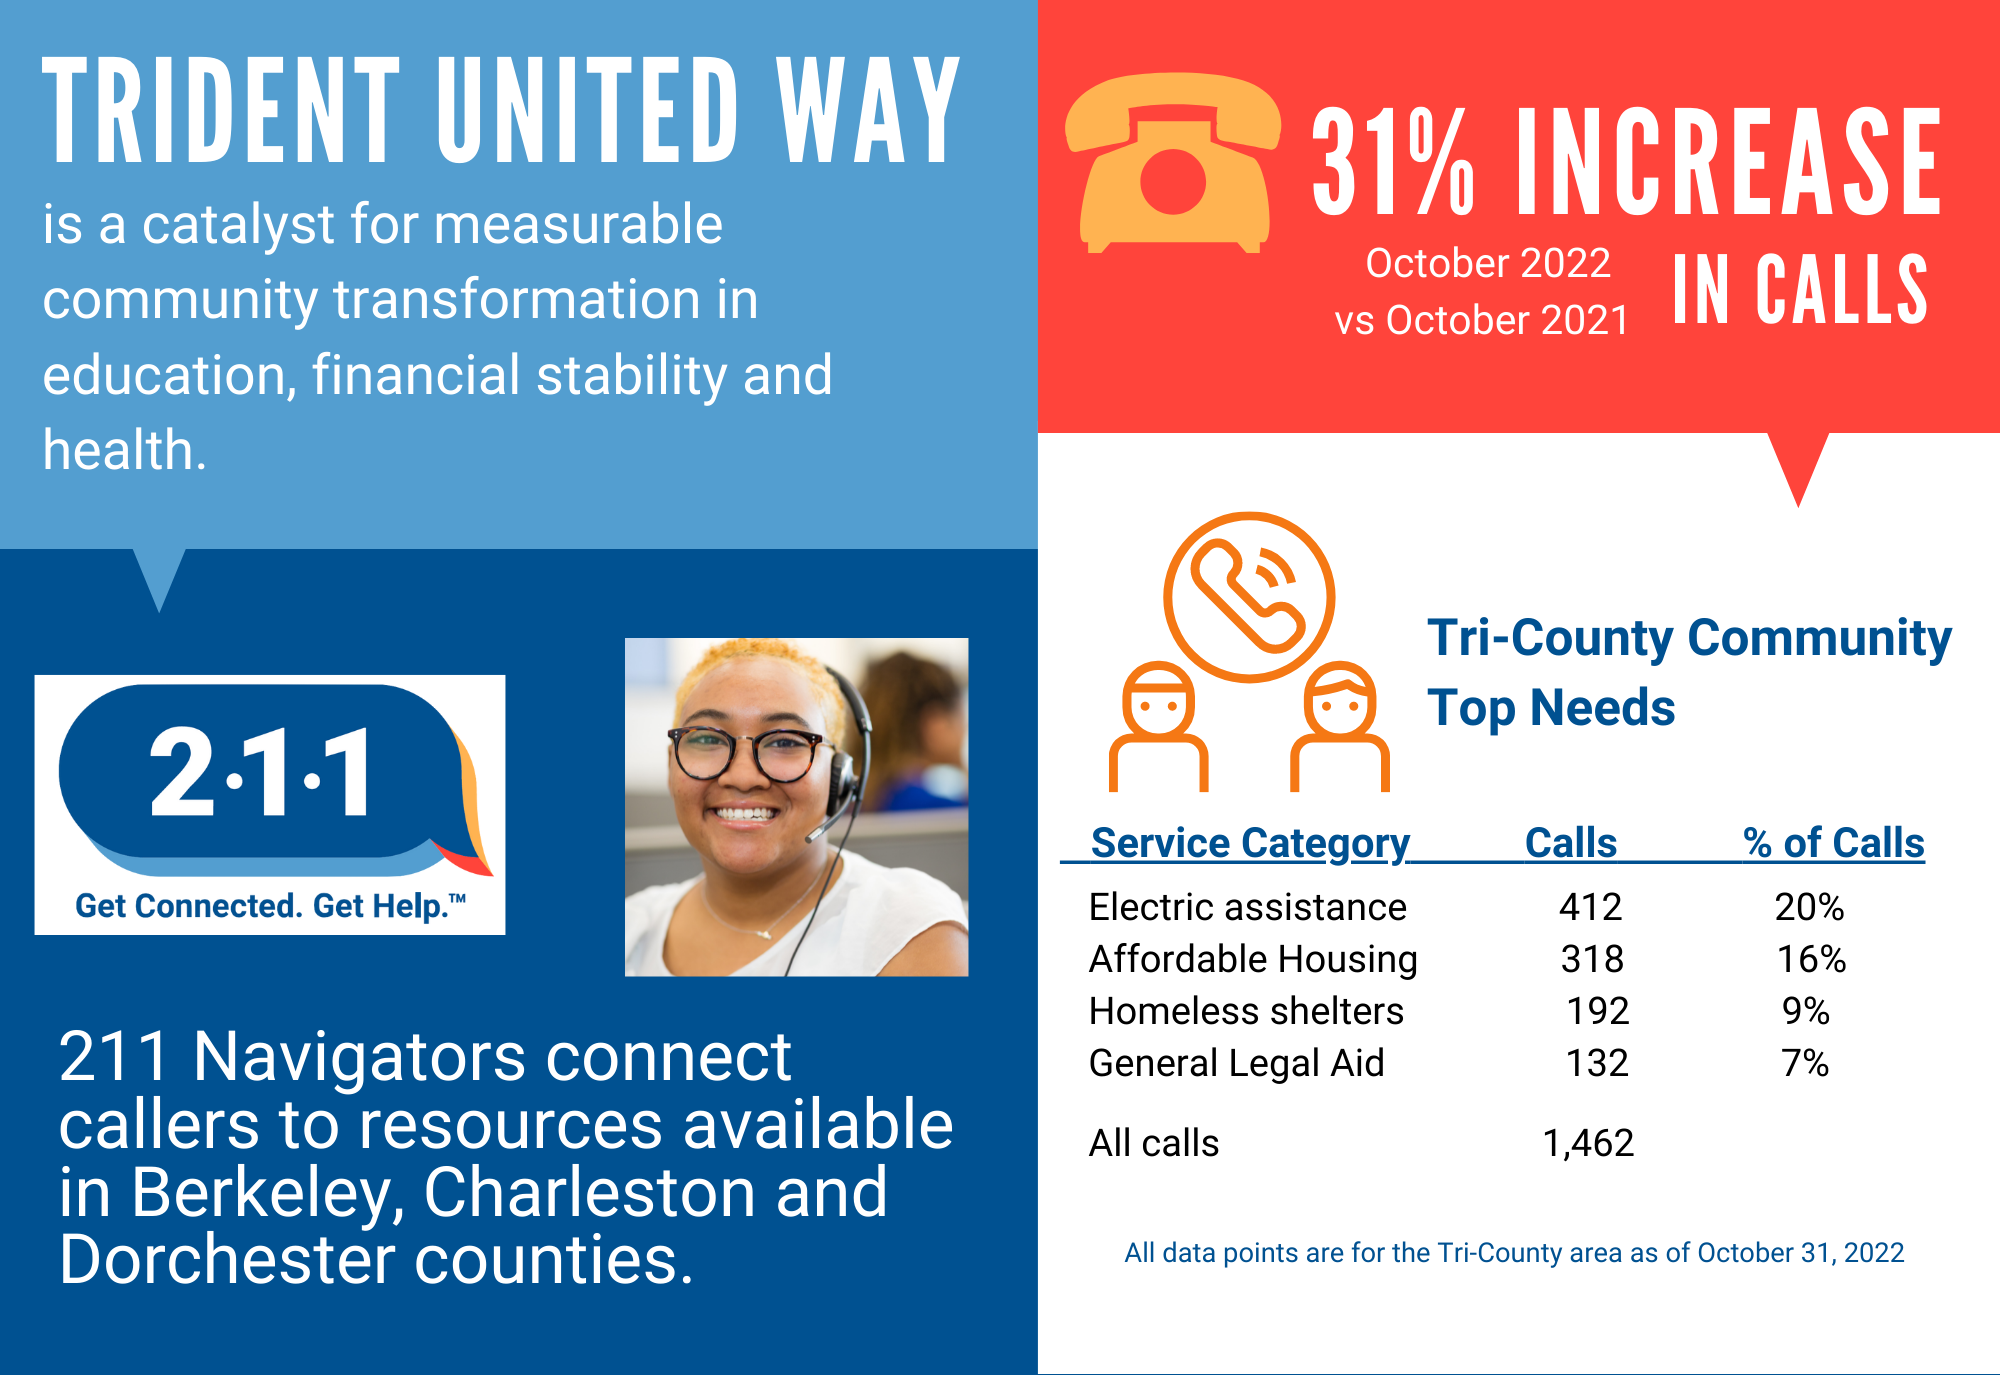 Graphic of Trident United Way statistics showing a 31% increase in calls from October 2022 vs. October 2021 and top service catgories of Electric, Affordable Housing, Homeless shelters and General Legal Aid